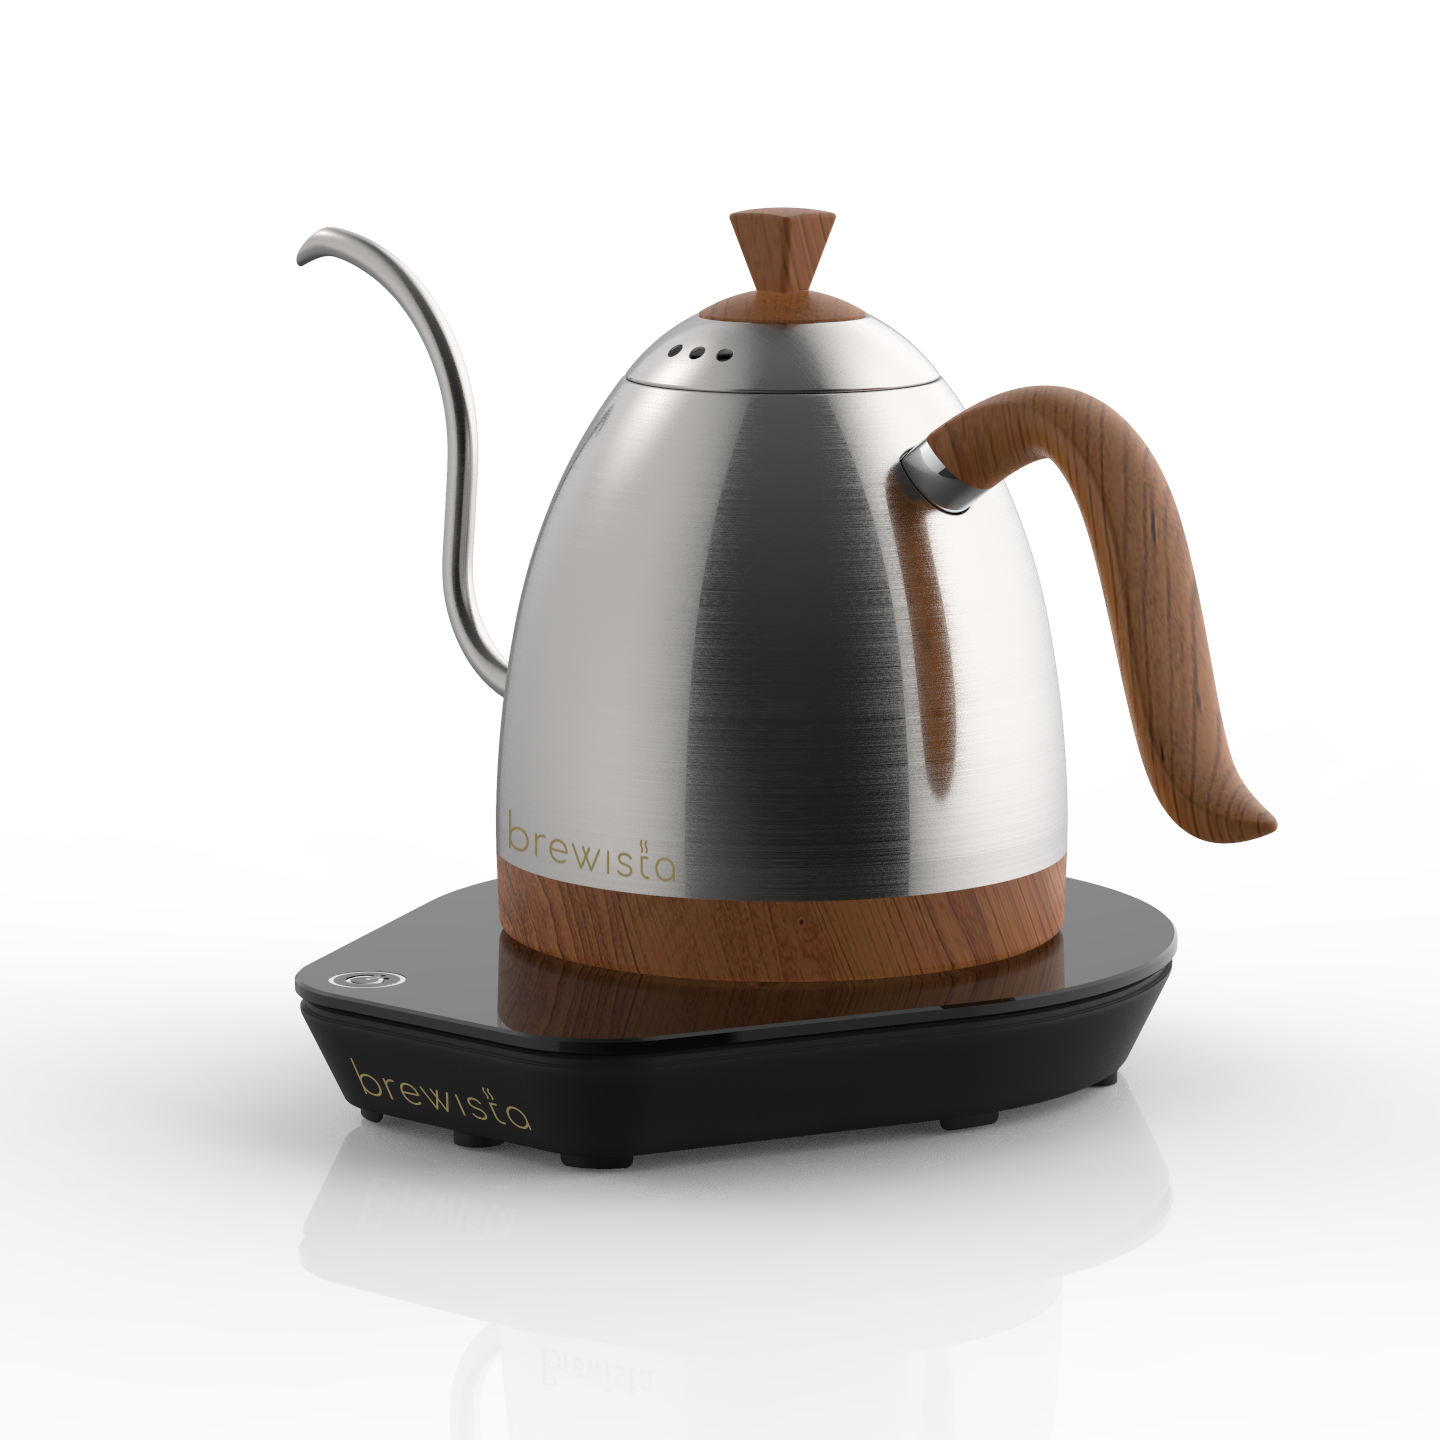 Coffee Pots Brewista Wooden Handle Thermostatic Kettle Tea Gooseneck  Electric Stainless Steel 600Ml 1 0L 230721 Drop Delivery Home G Dheug From  Stamps2019, $107.75